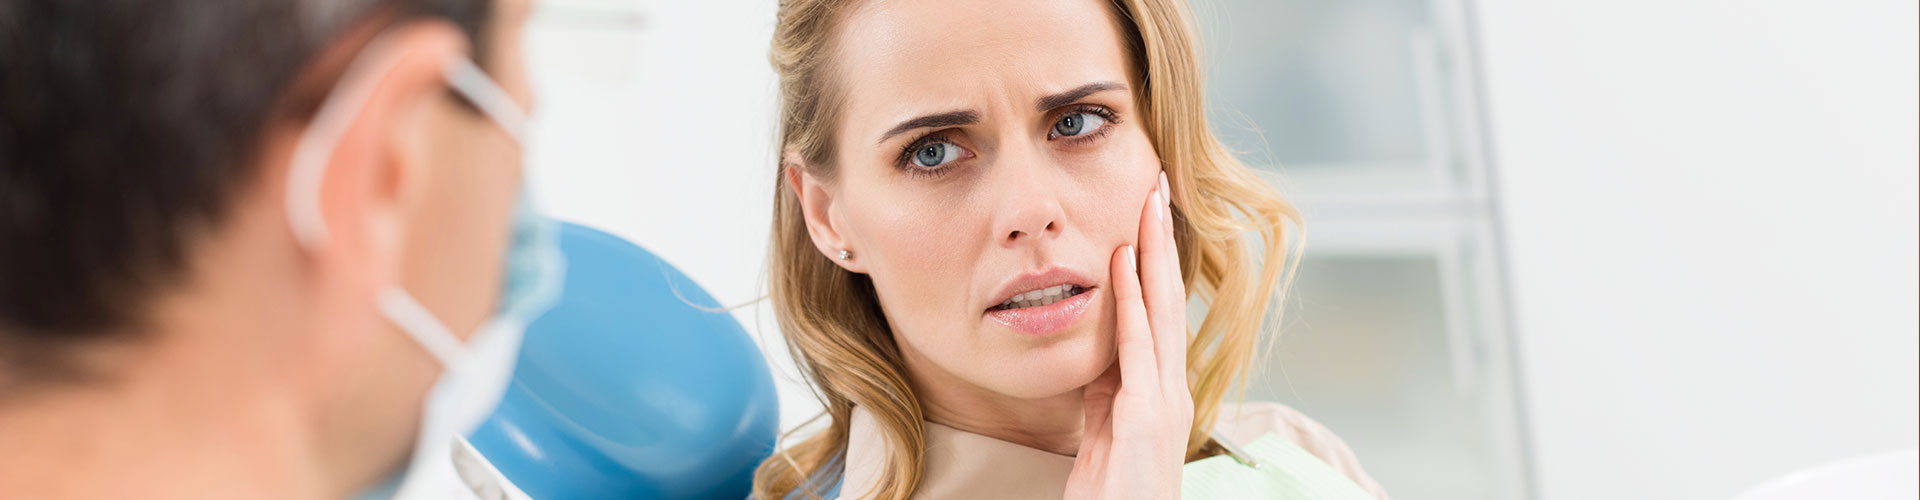 Woman having toothache - Dentist in West Chester PA